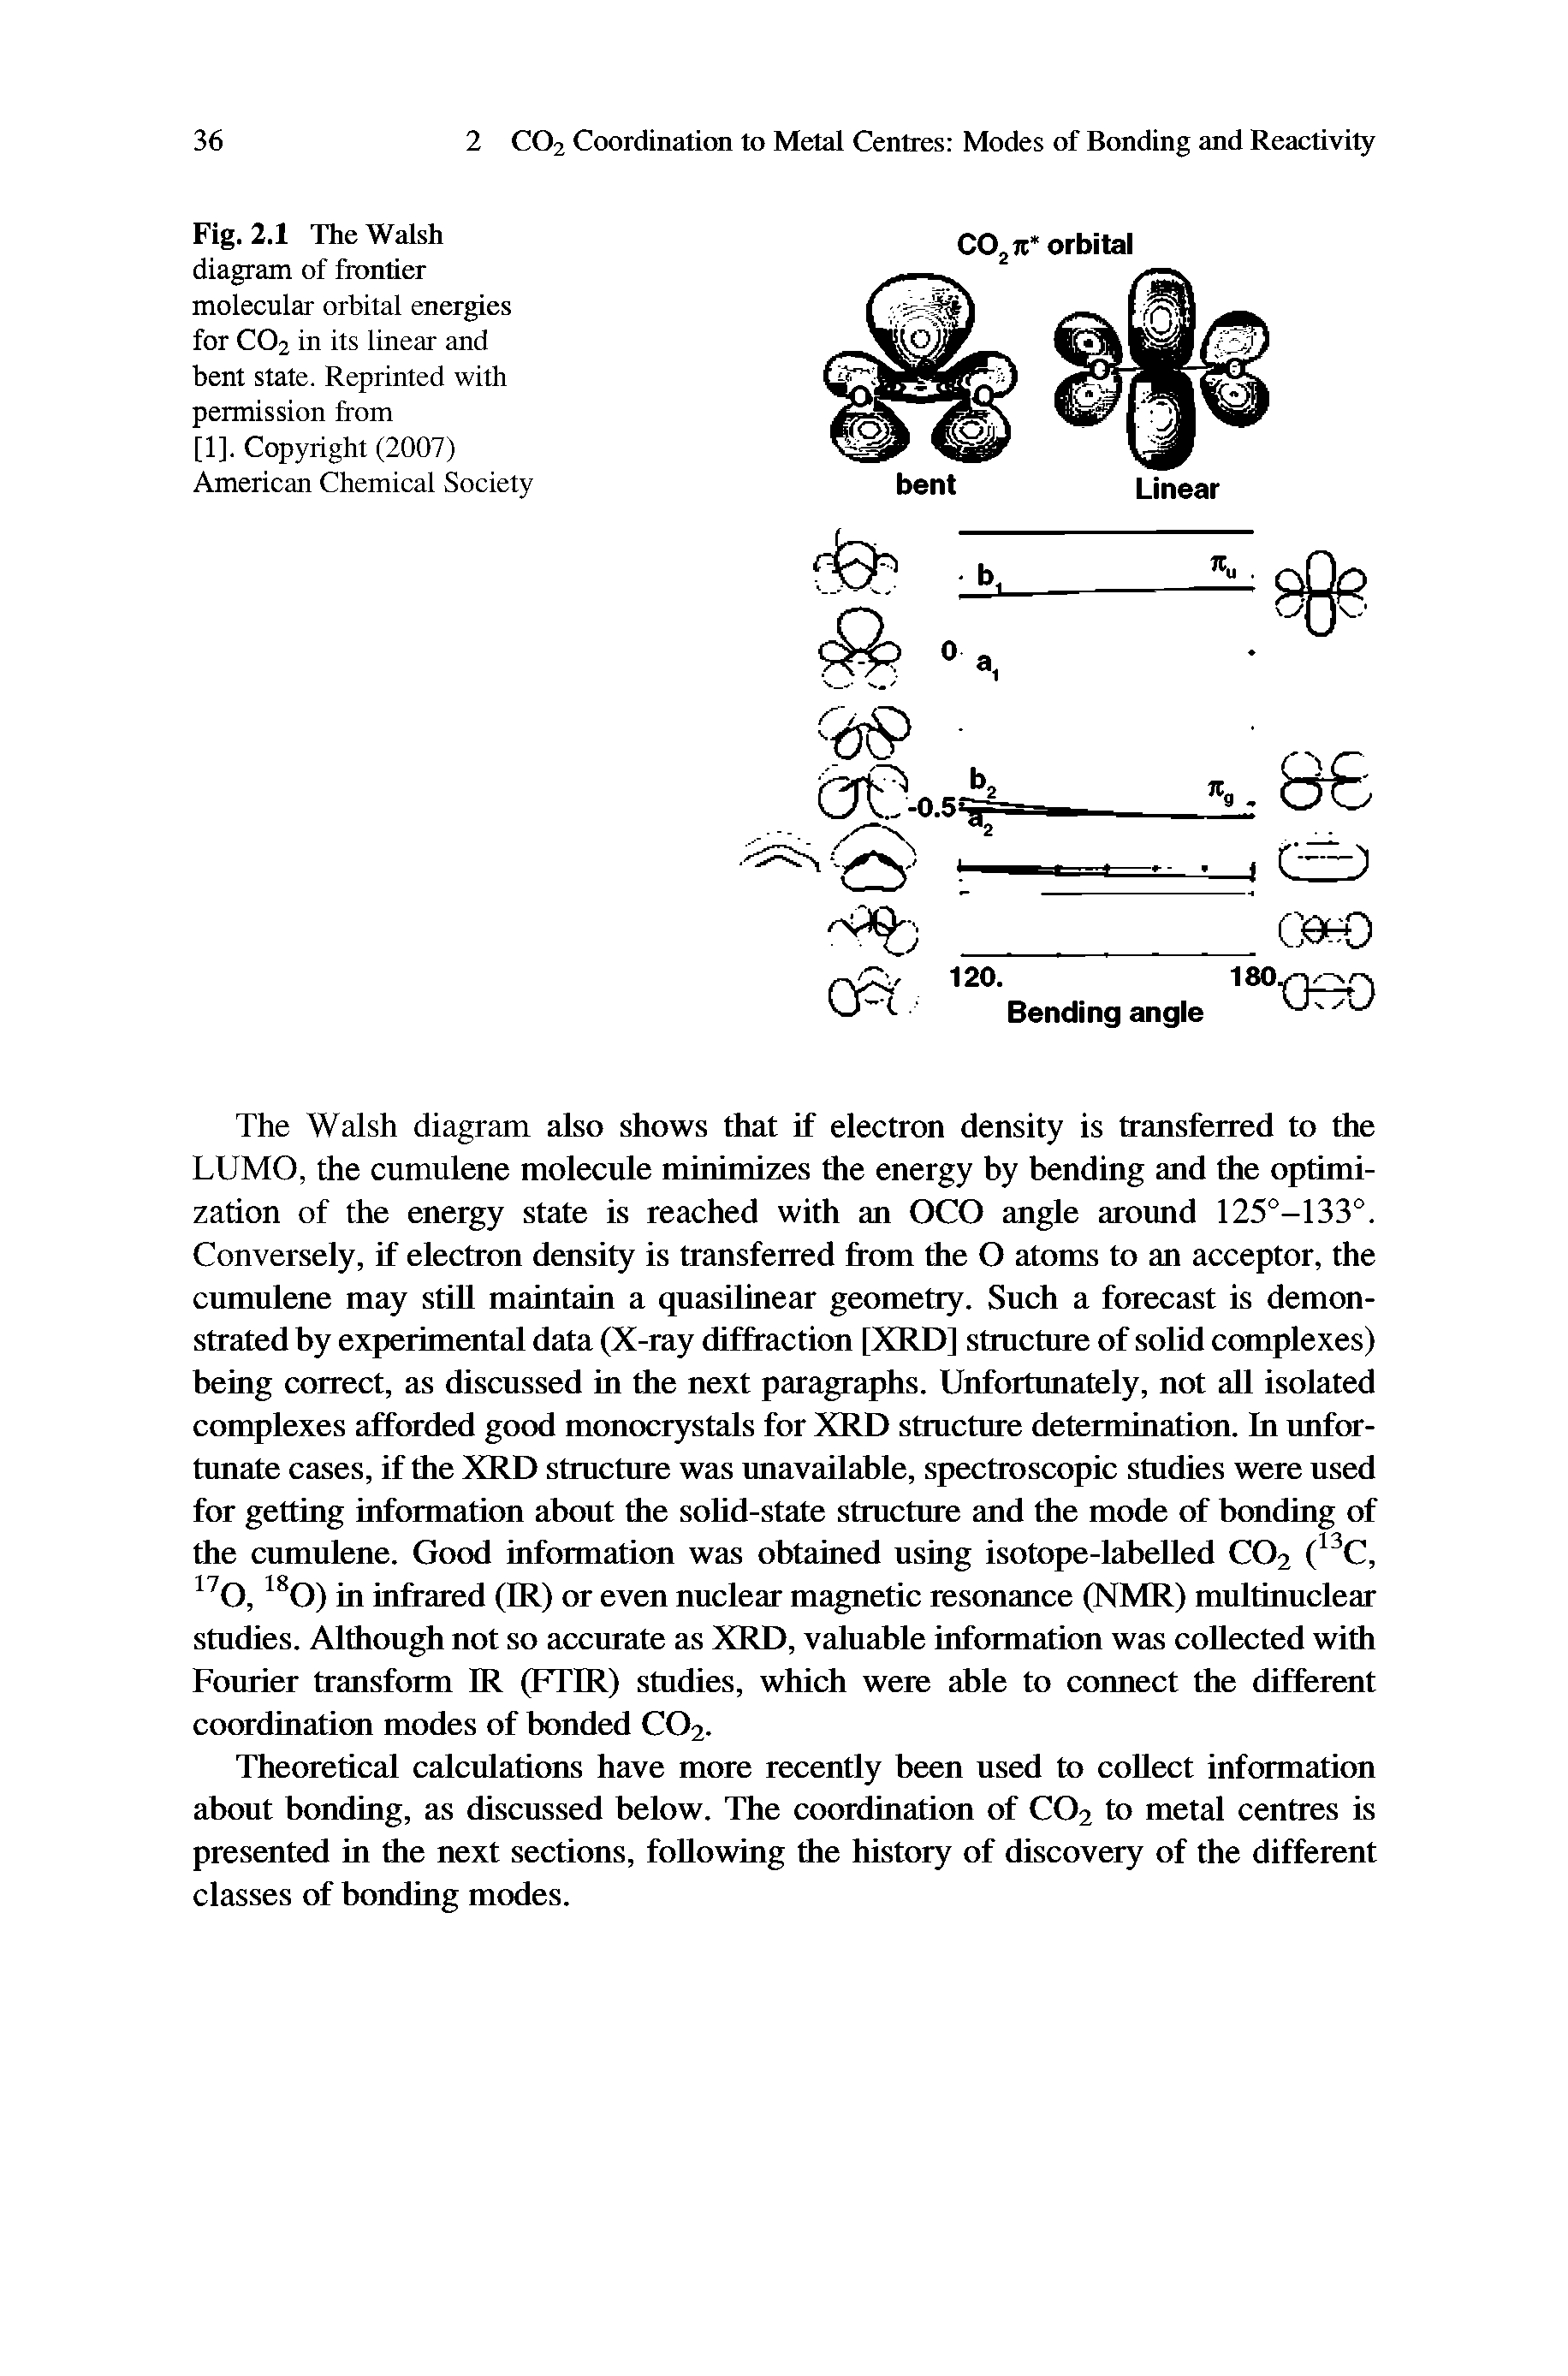 Fig. 2.1 The Walsh diagram of frontier molecular orbital energies for CO2 in its linear and bent state. Reprinted with permission from [1]. Copyright (2007) American Chemical Society...